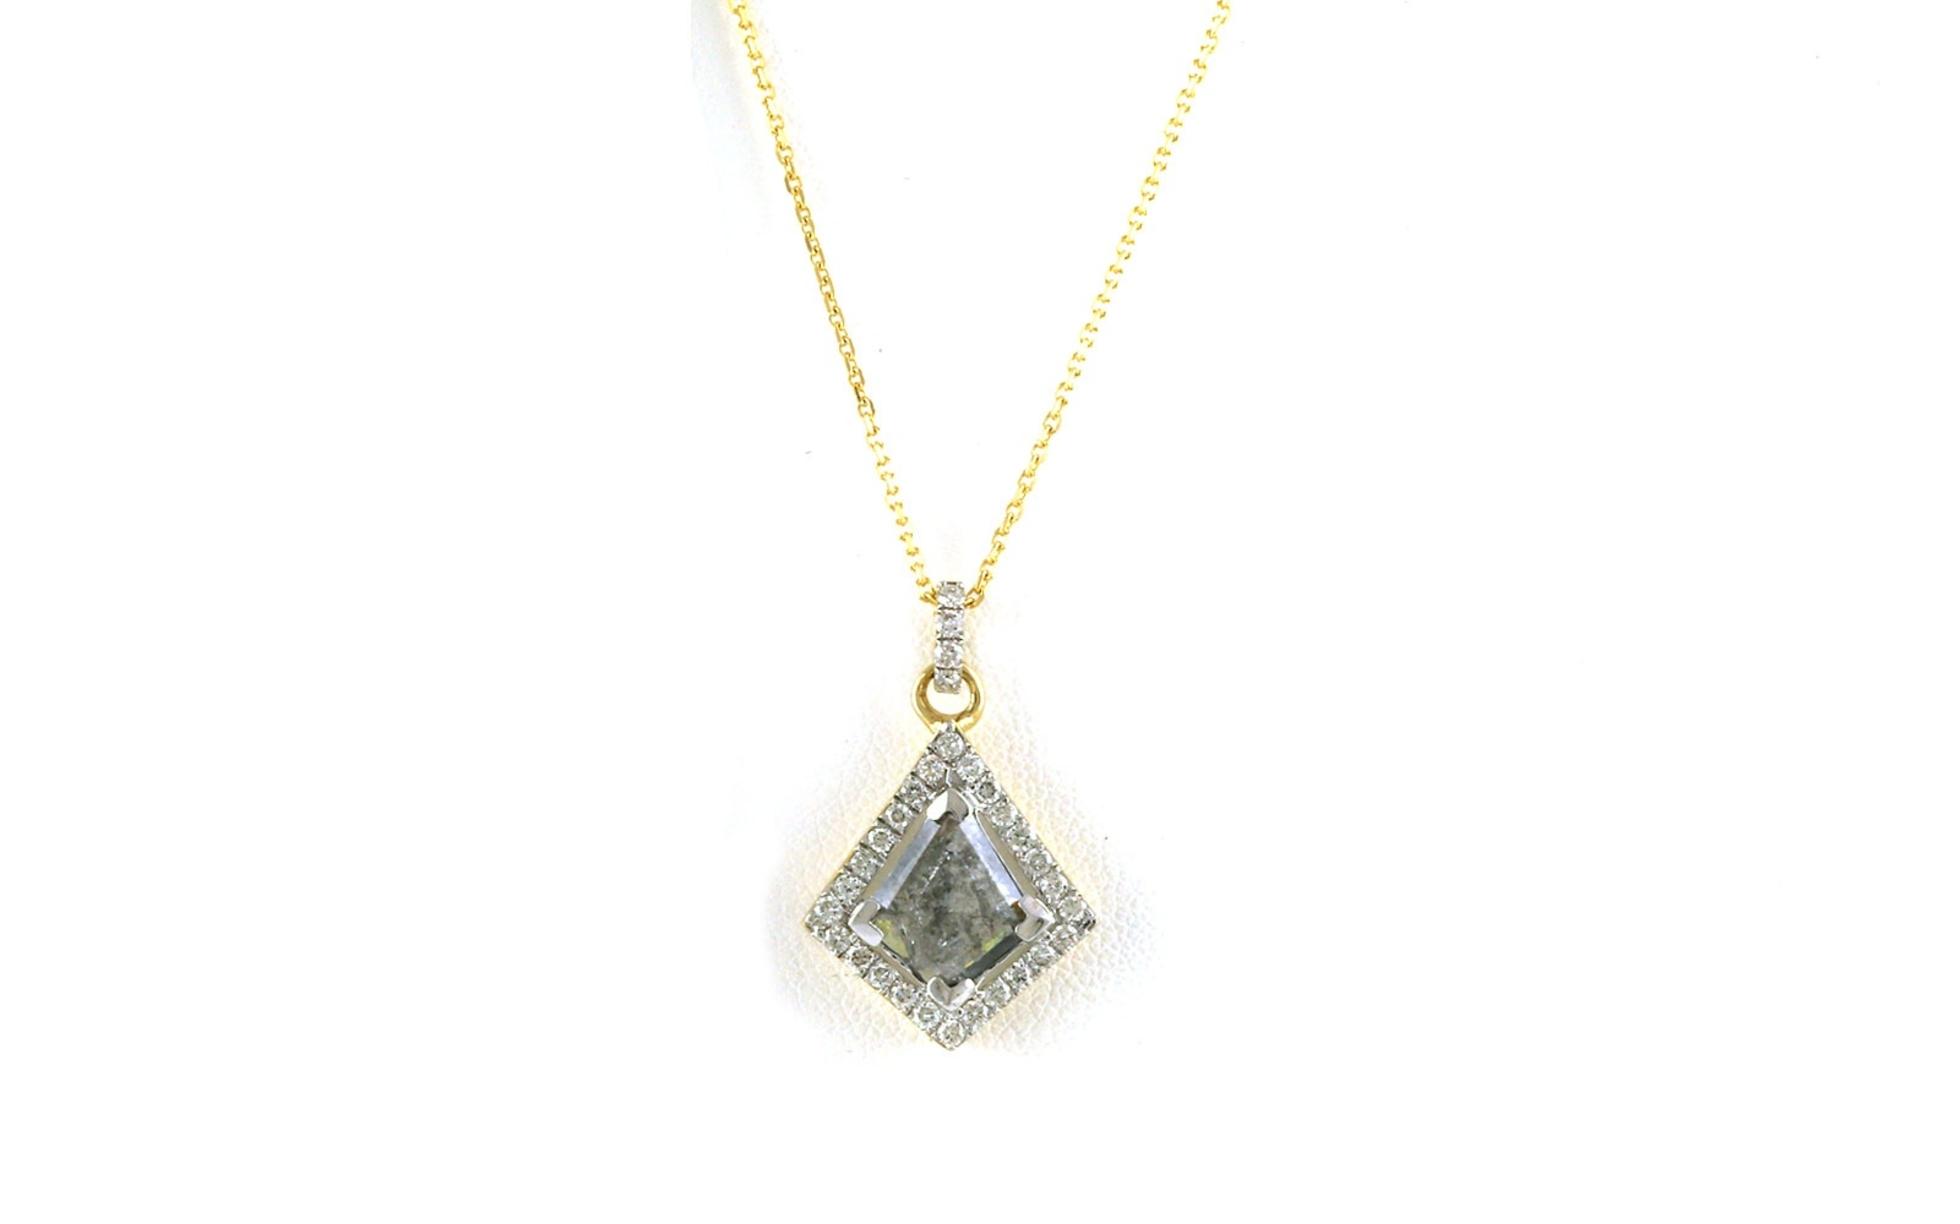 Drop Halo Kite-cut Diamond Necklace in Two-tone Gold (1.22cts TWT)